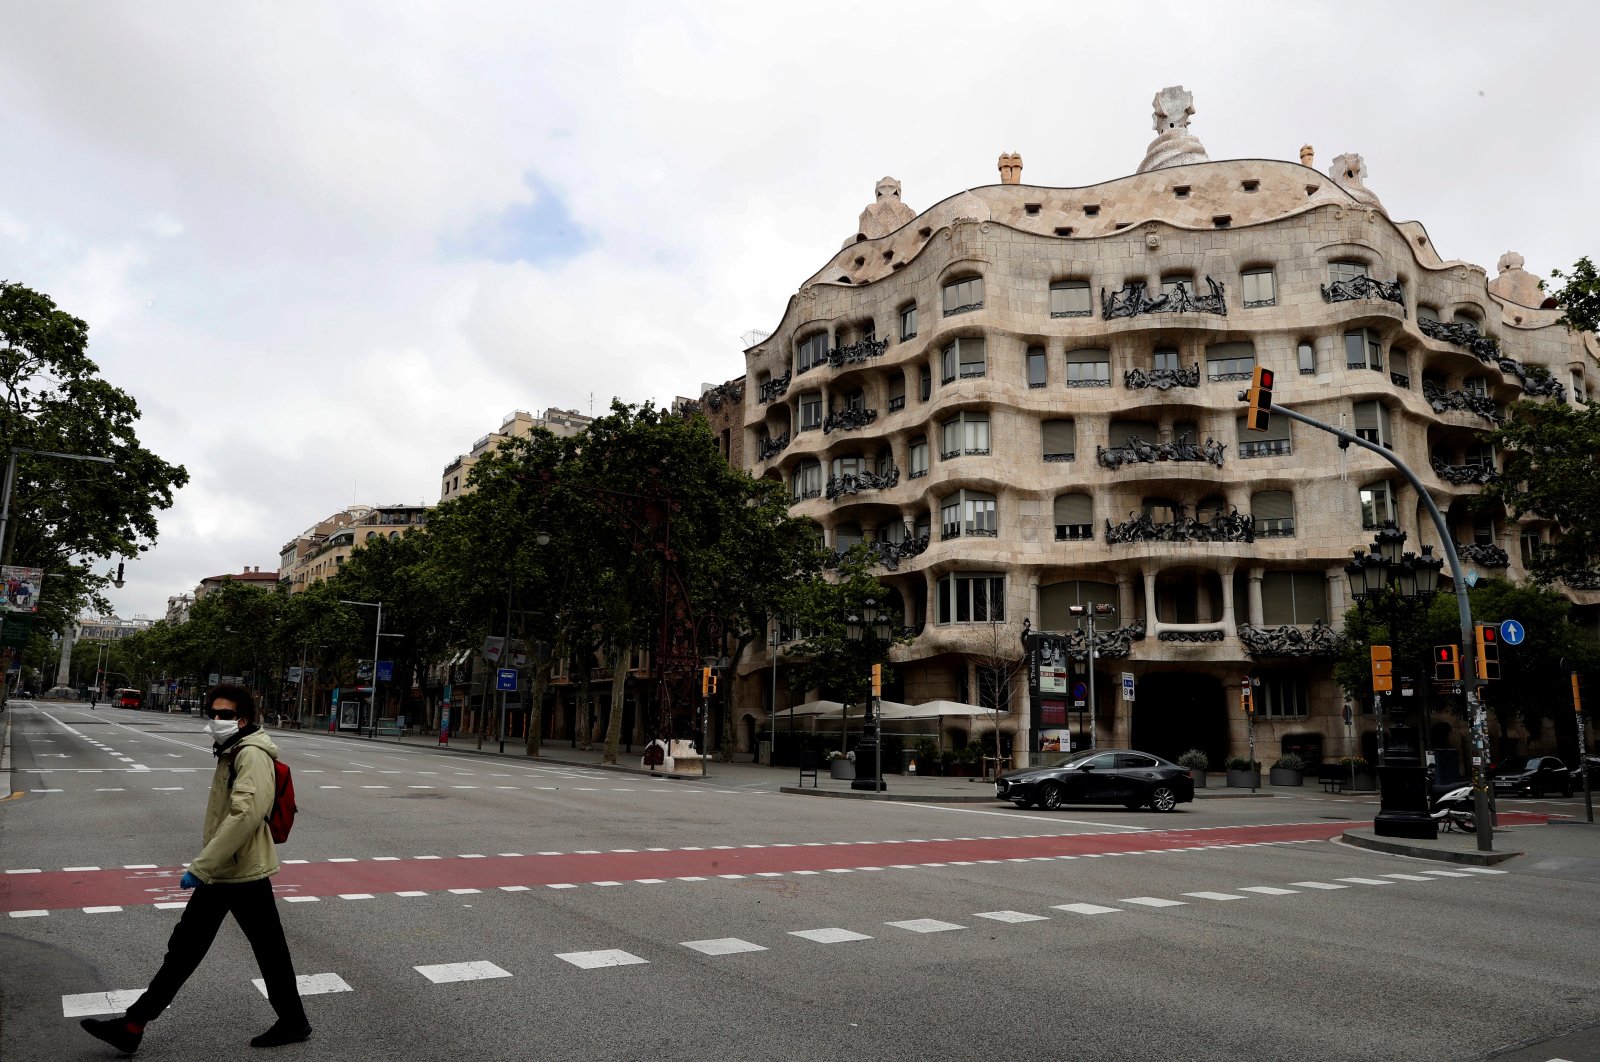 A man promenades with his dog in front of Pedrera's bulding by Guadi at Paseo de Gracia street in an empty Barcelona, Spain,18 April 2020, during the coronavirus crisis. (EPA-EFE/Toni Albir Photo)